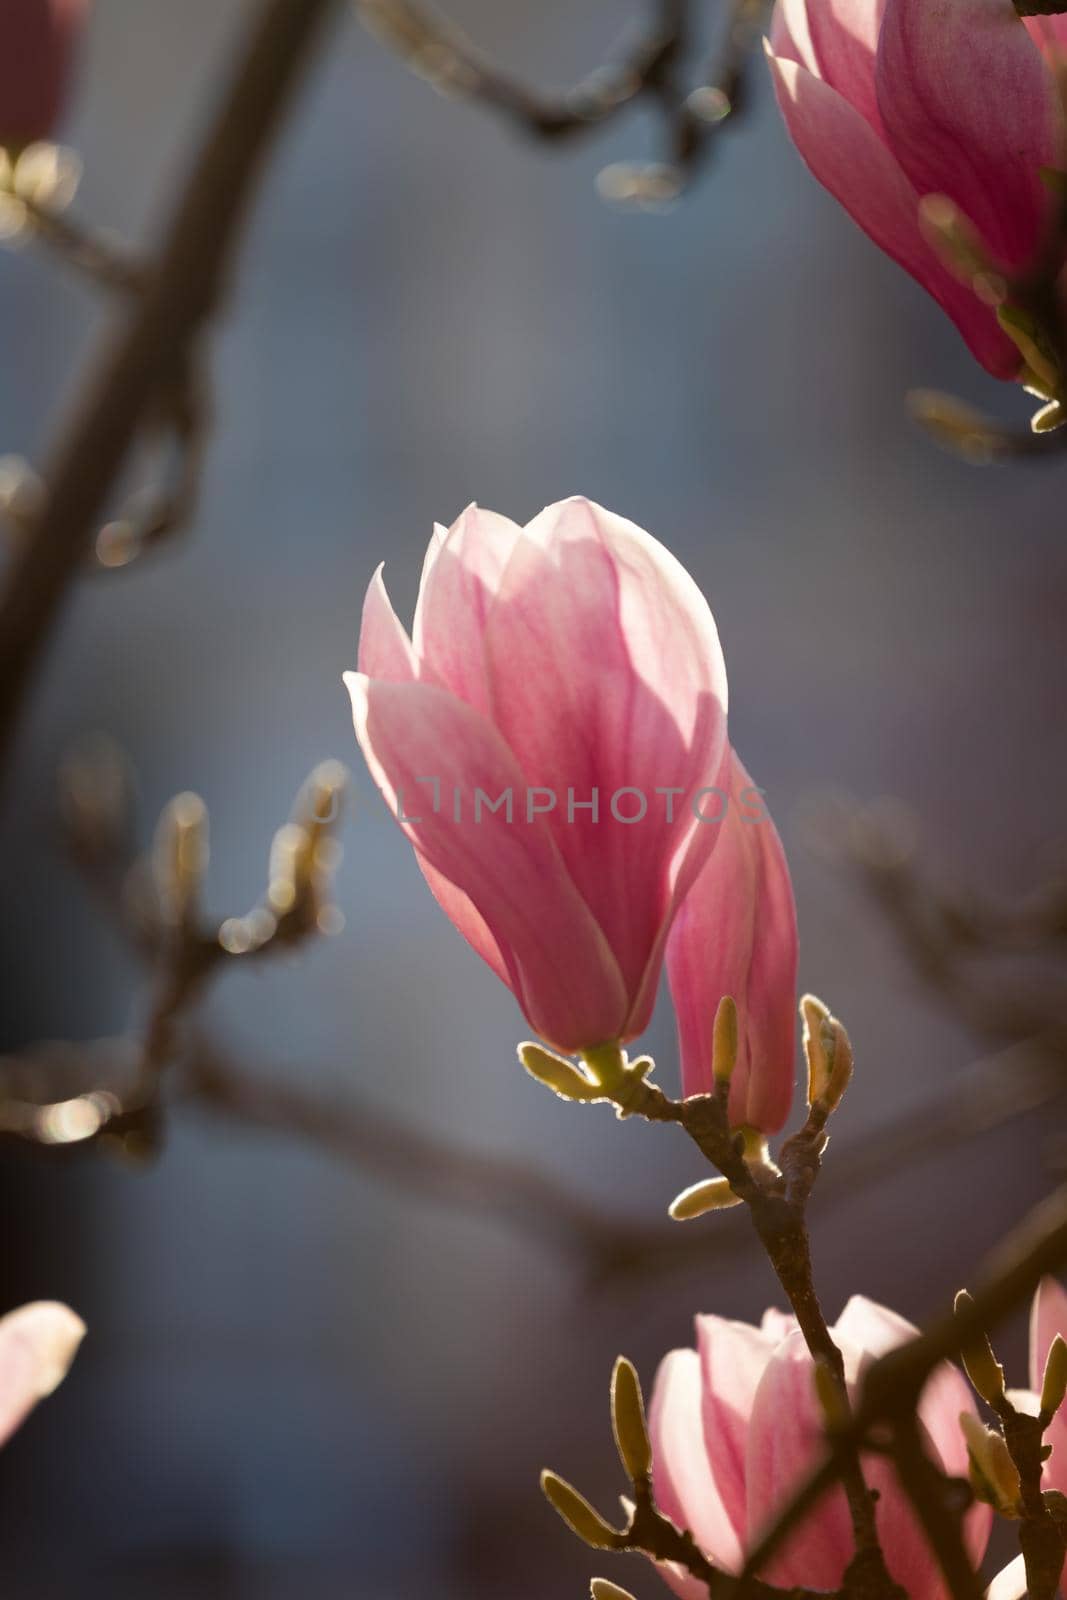 Springtime: Blooming tree with pink magnolia blossoms, beauty by Daxenbichler